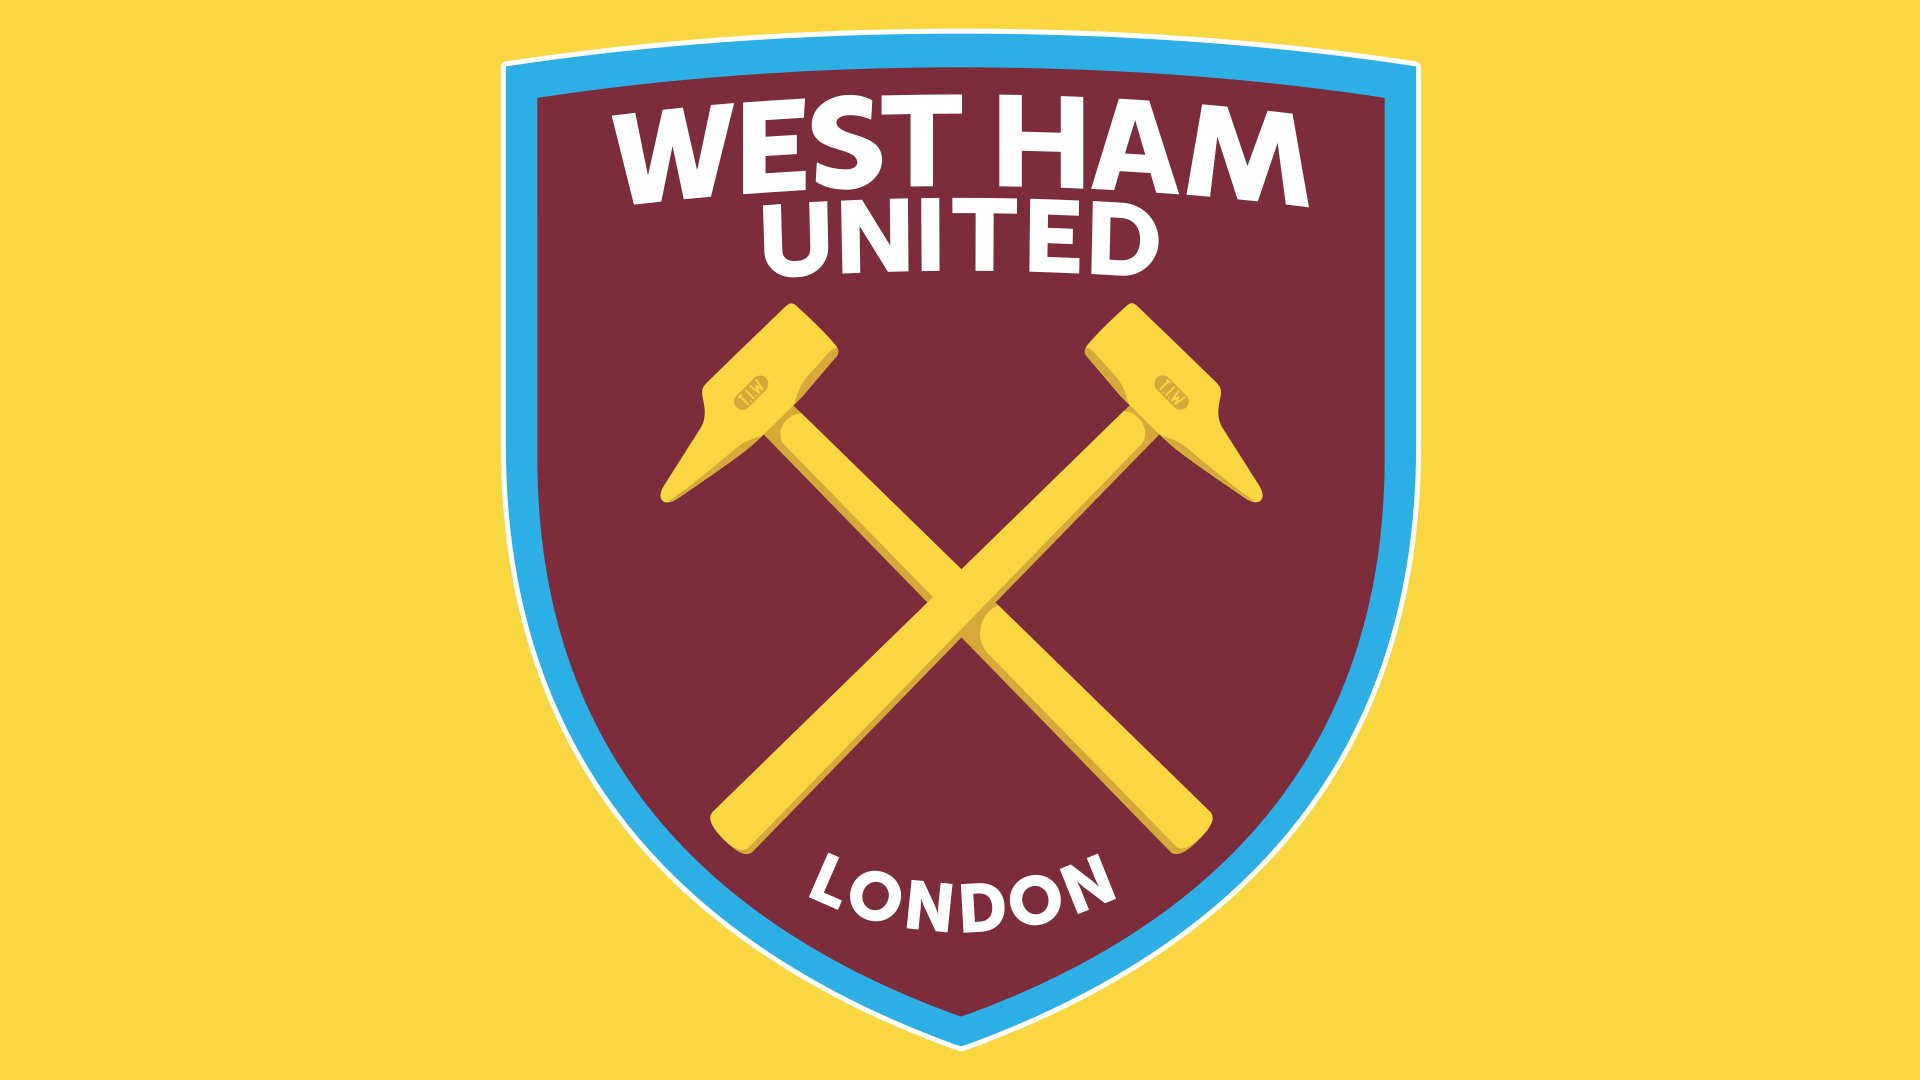 Meaning West Ham United logo and symbol | history and evolution